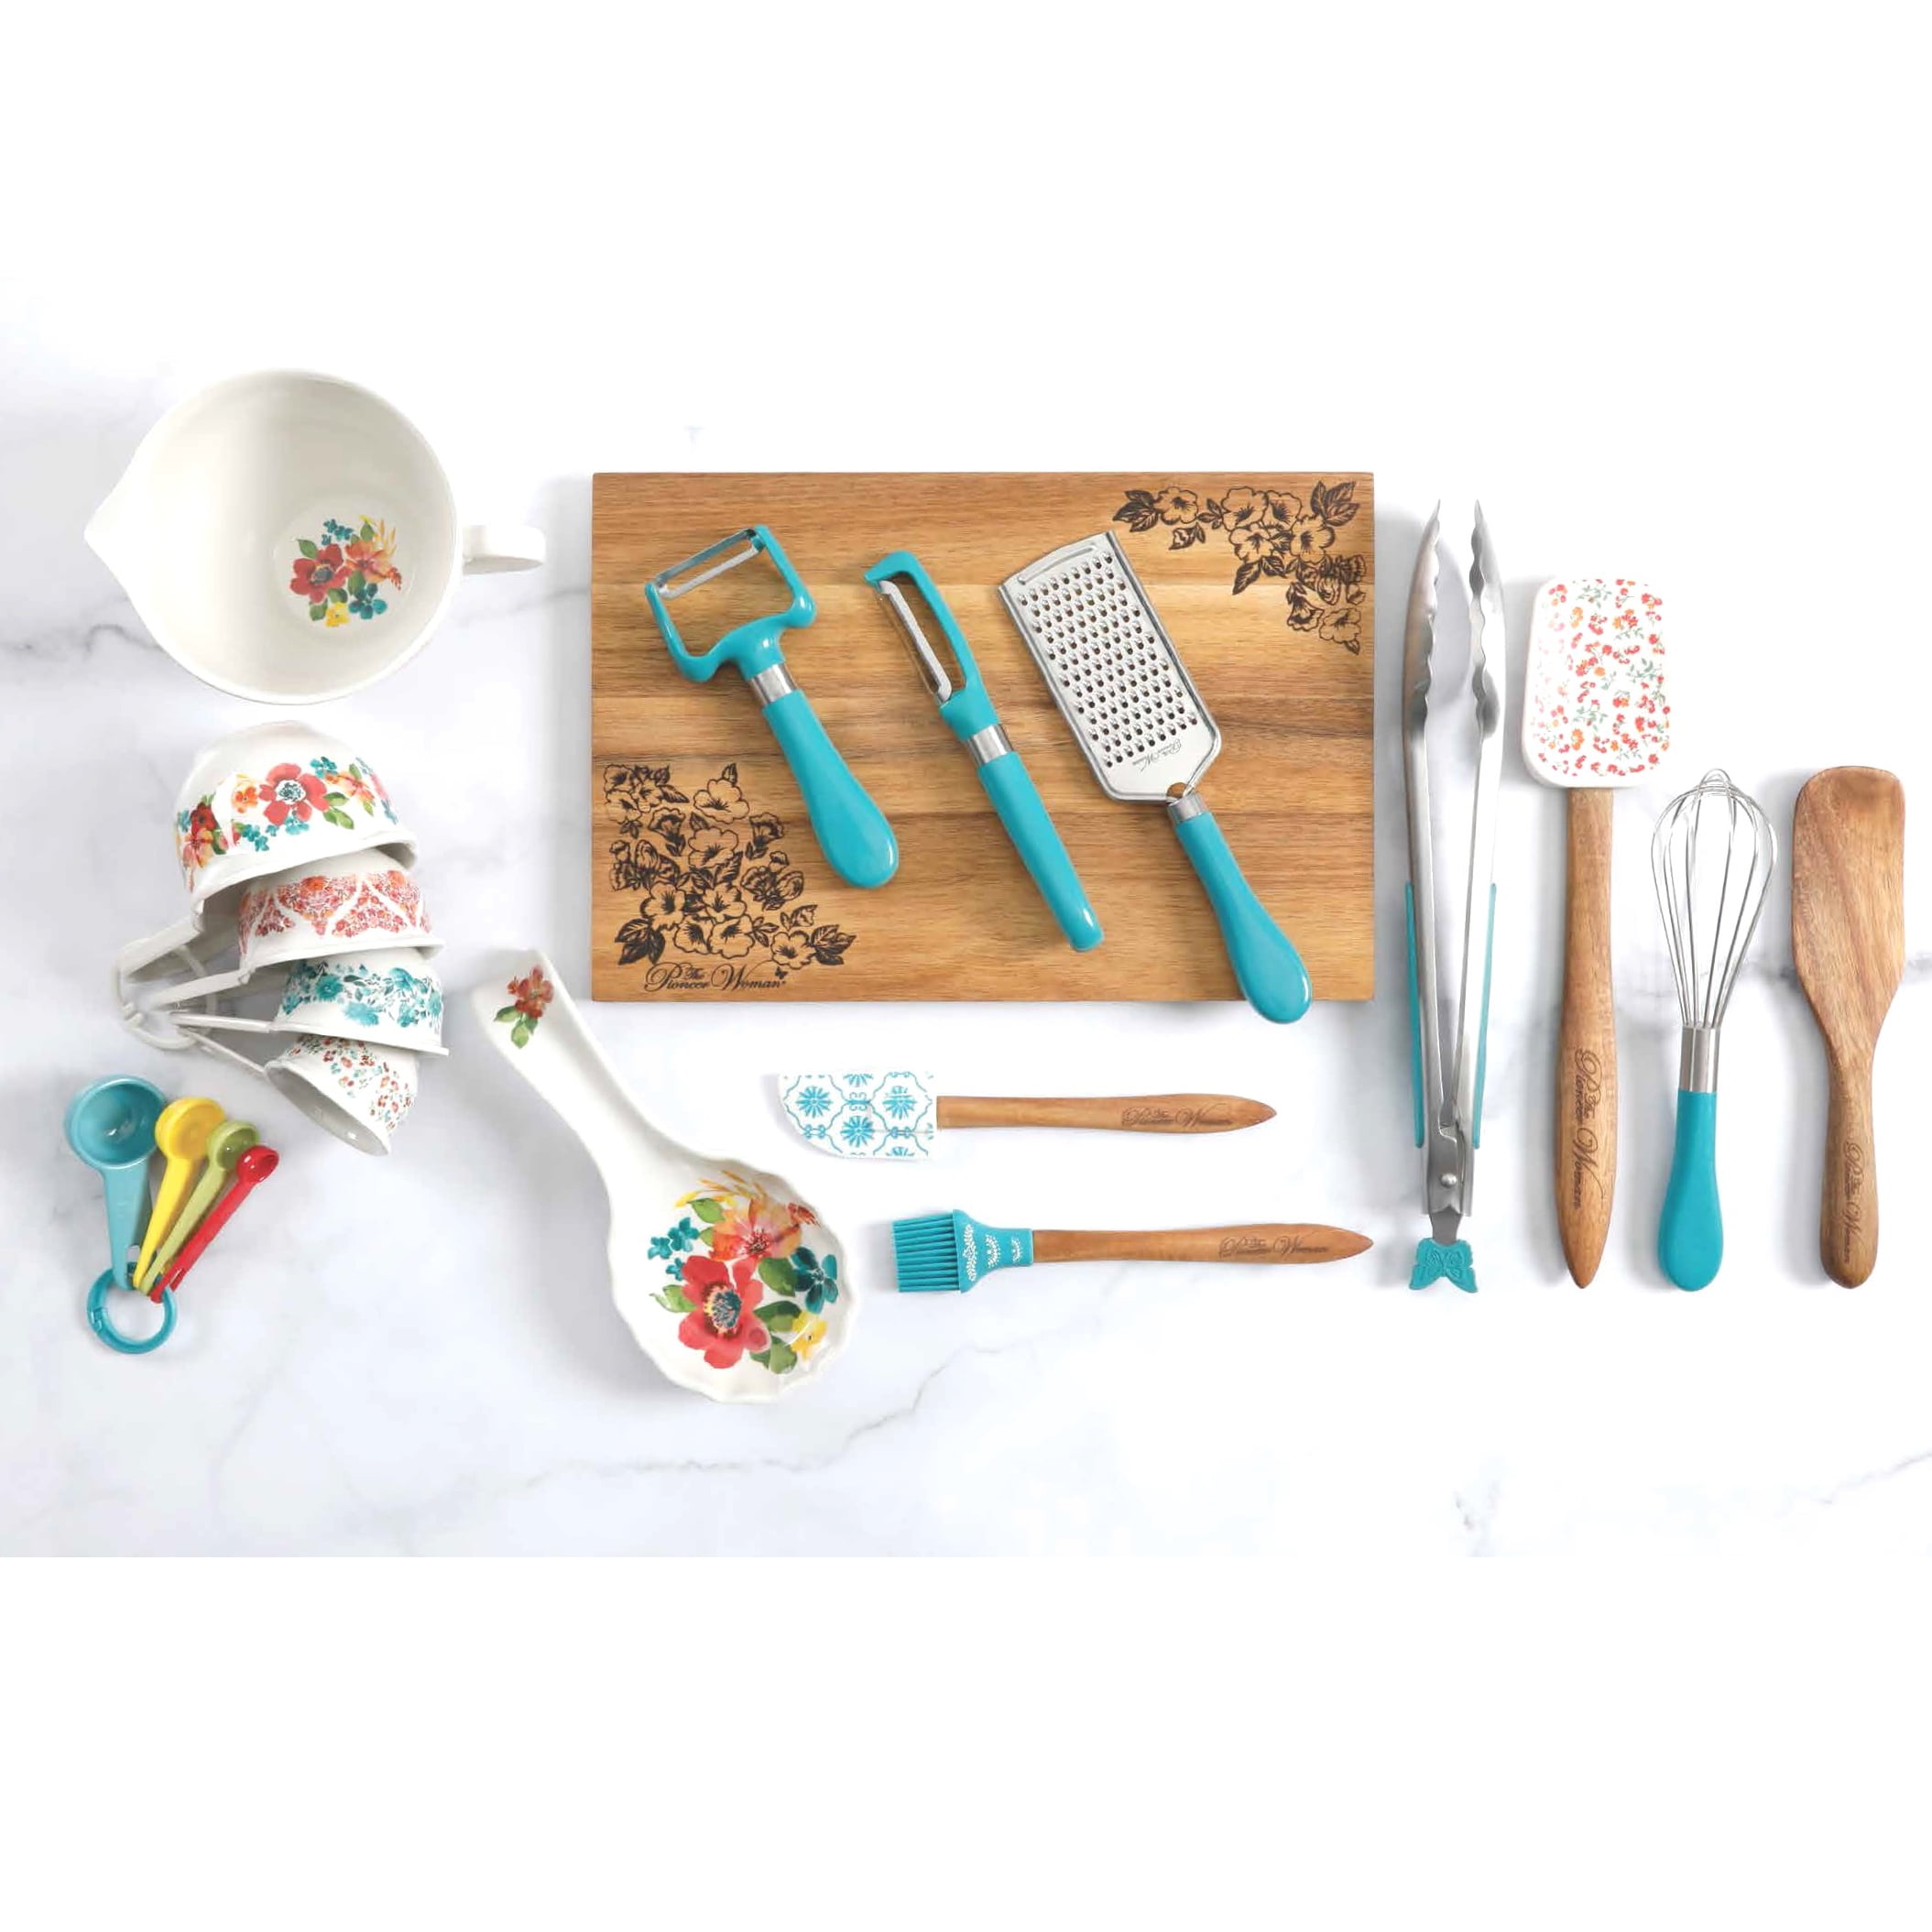 The Pioneer Woman 10-Piece Kitchen Gadget Set with Sifter, Spatulas,  Scoops, and Clips, Teal/Floral 